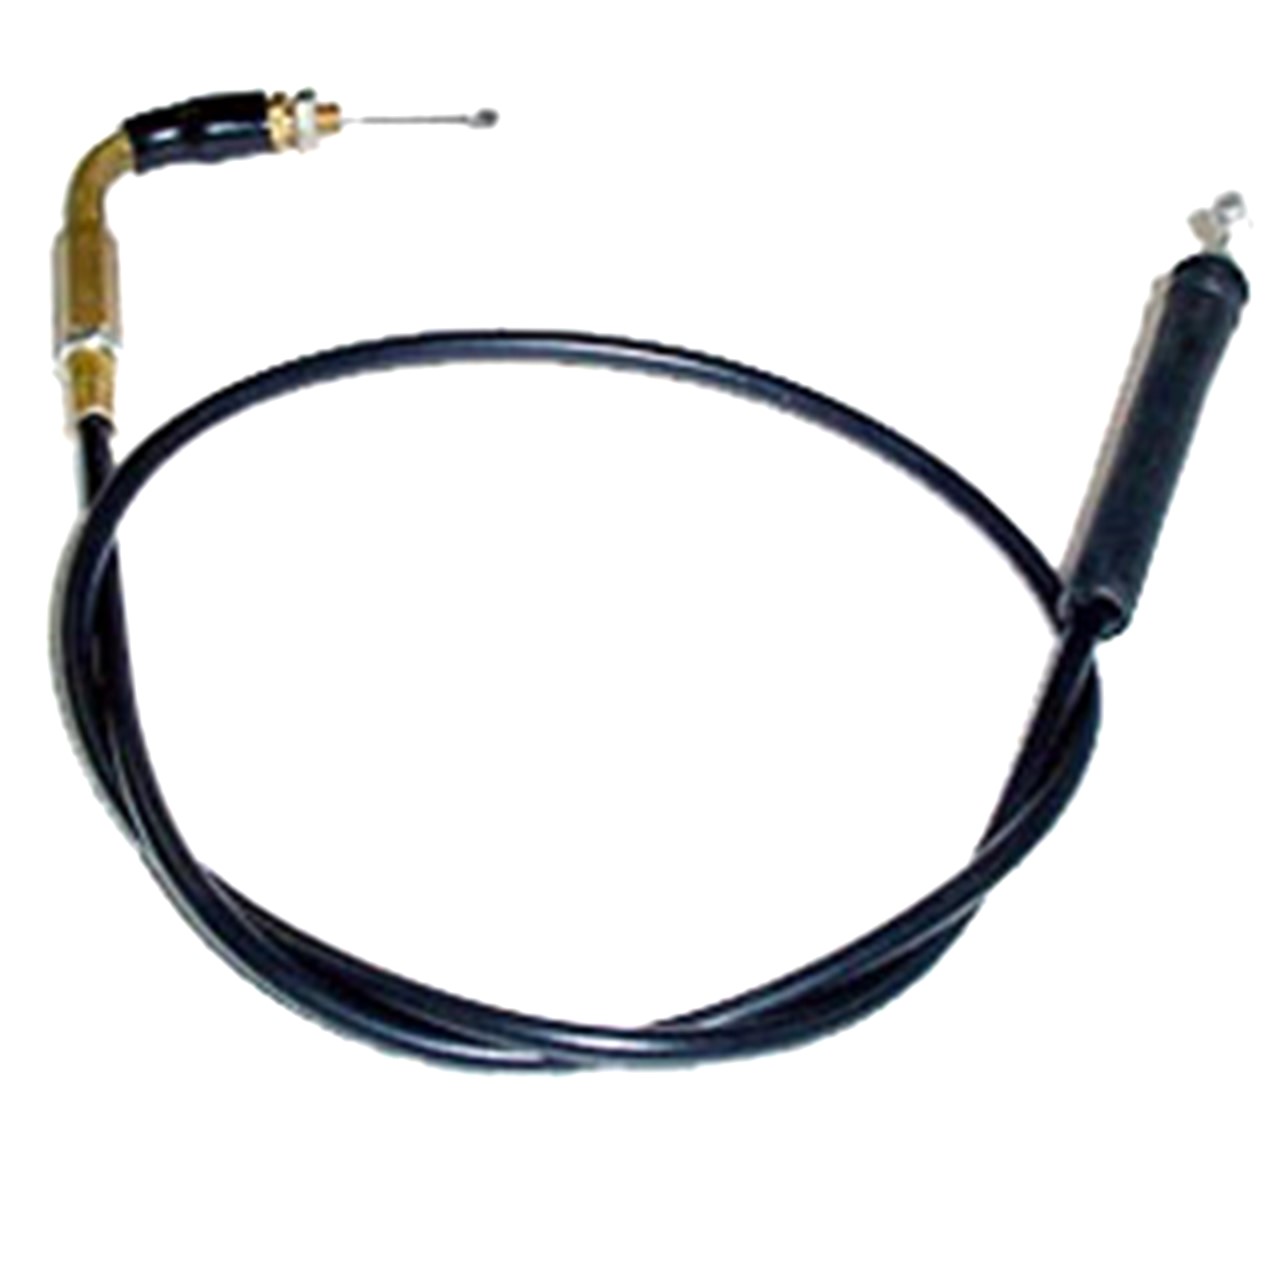 Throttle Cable Fits E-Ton Rascal, Viper Jr RXL40cc ATVs + Dirtbikes Out=34"/Inner Wire=35.5" - Click Image to Close